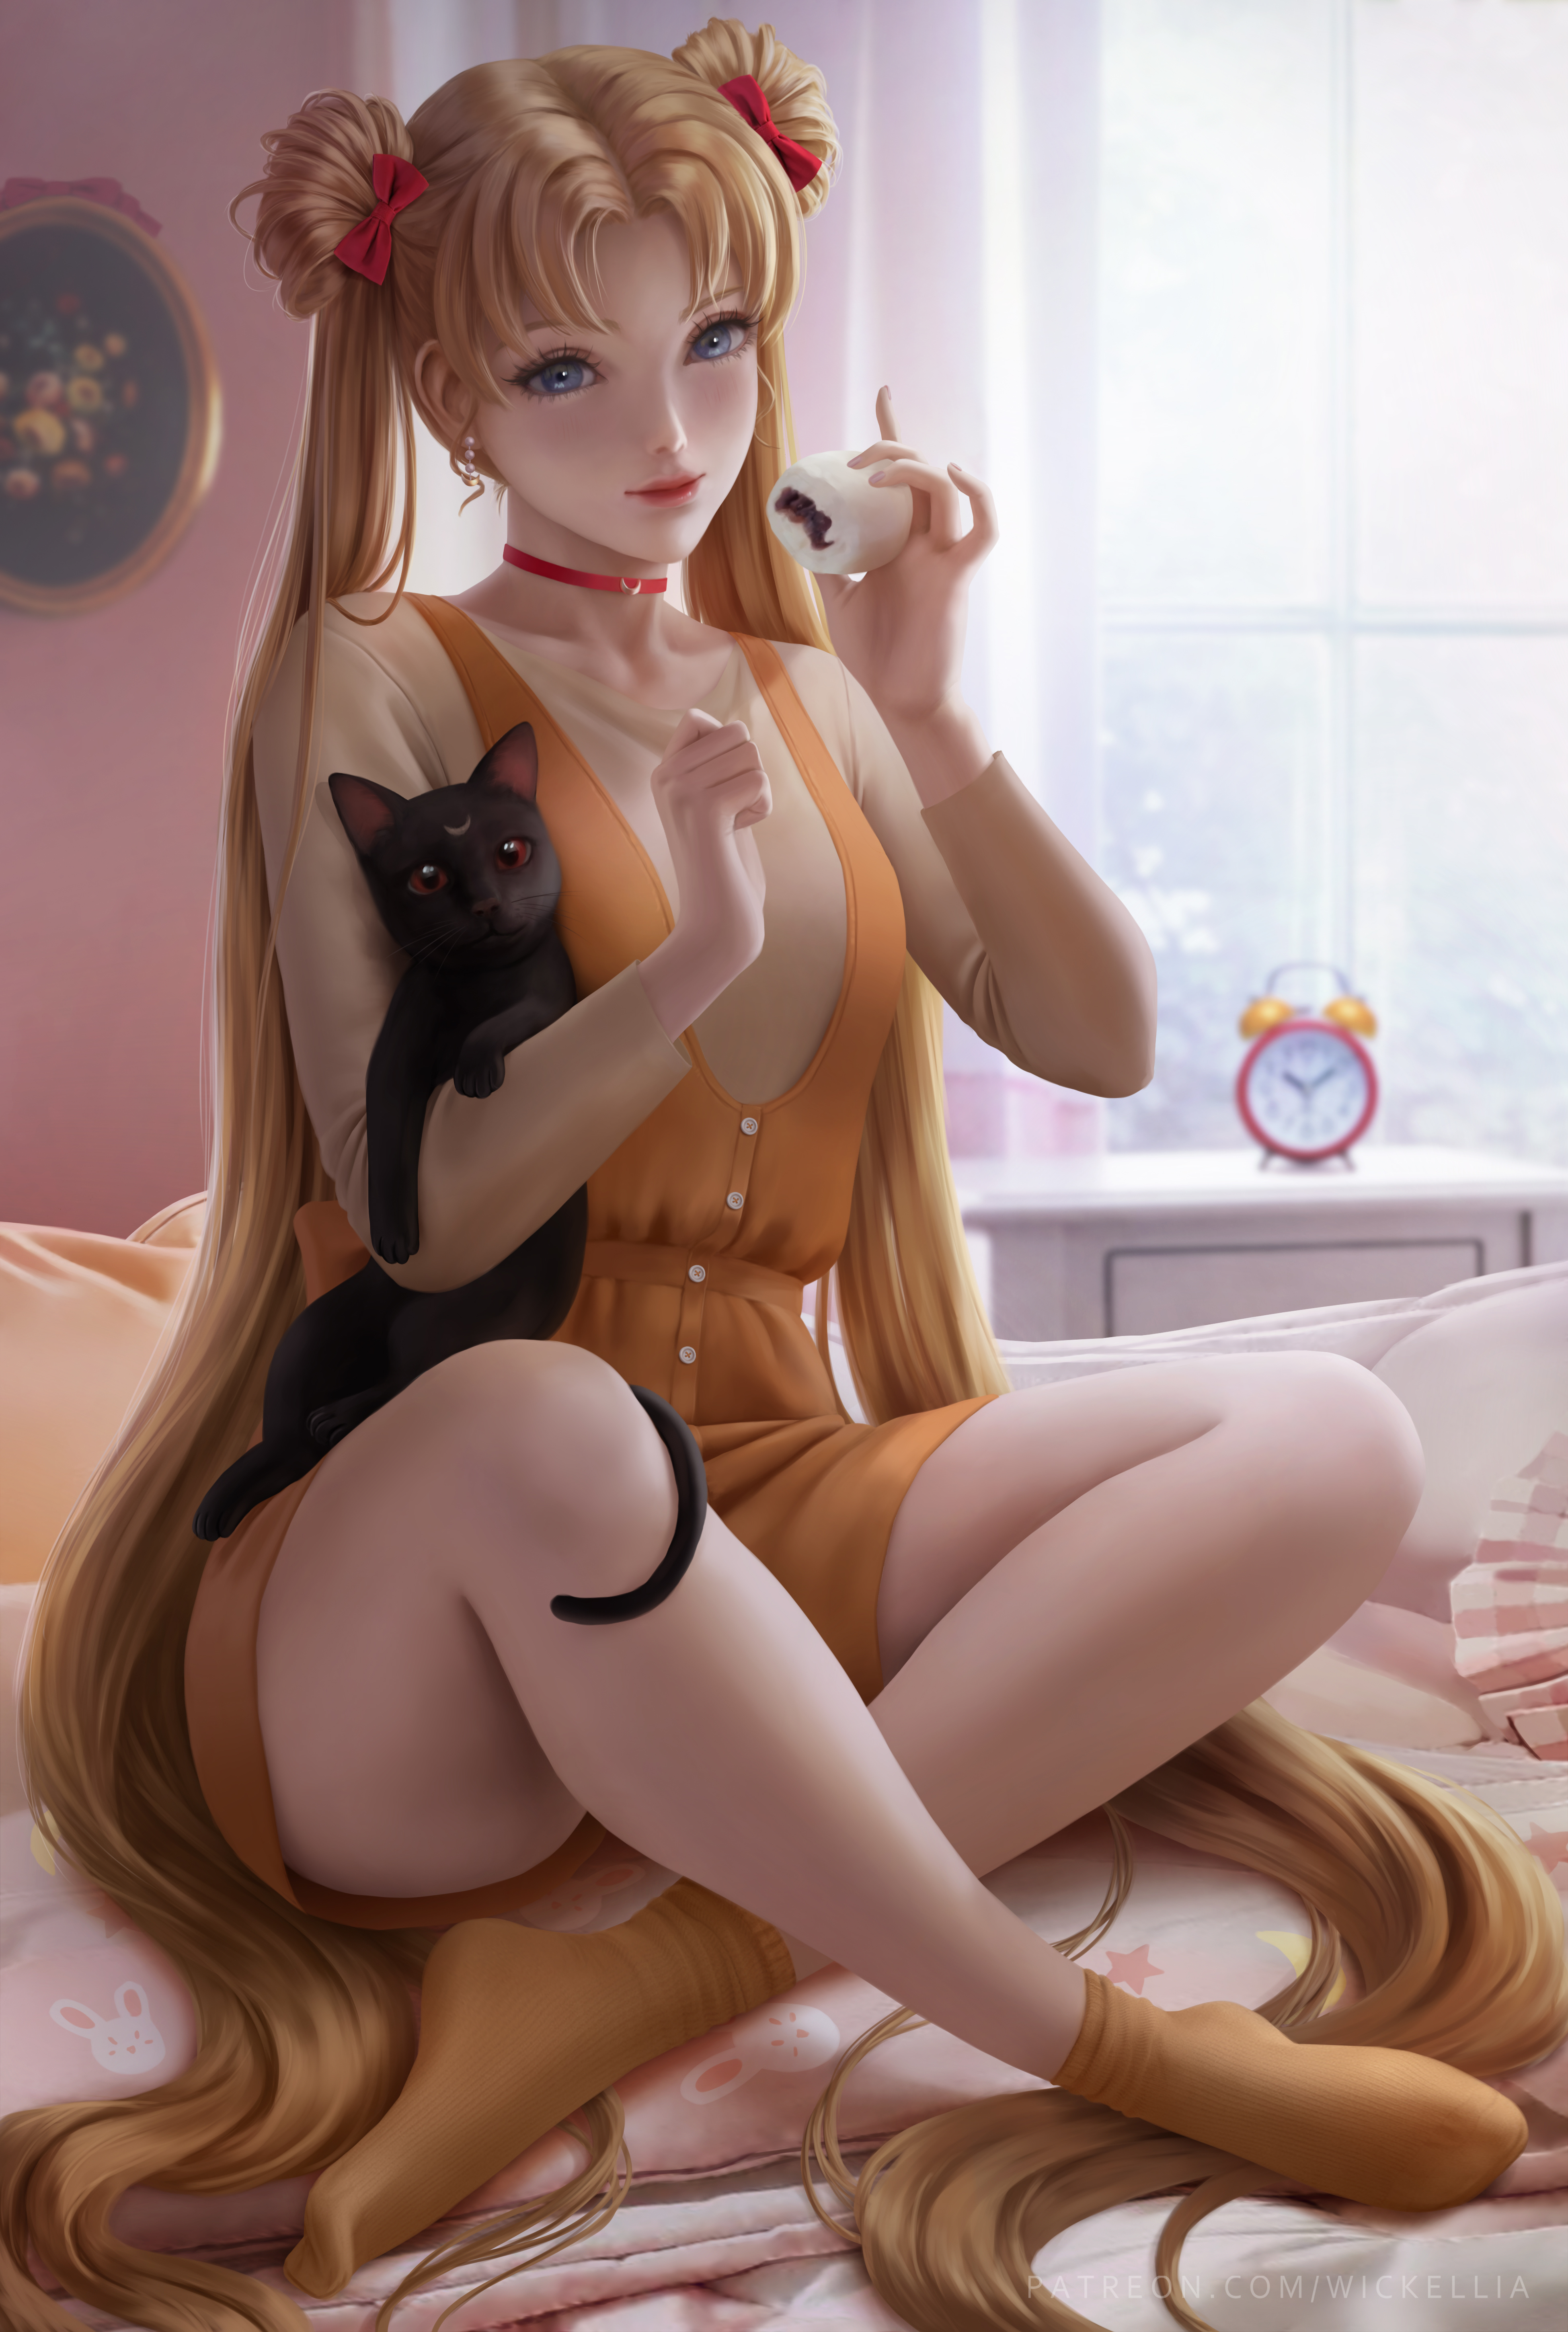 Anime 3900x5800 Tsukino Usagi anime anime girls cats casual socks blonde twintails blue eyes sitting in bed portrait display 2D artwork drawing fan art Wickellia